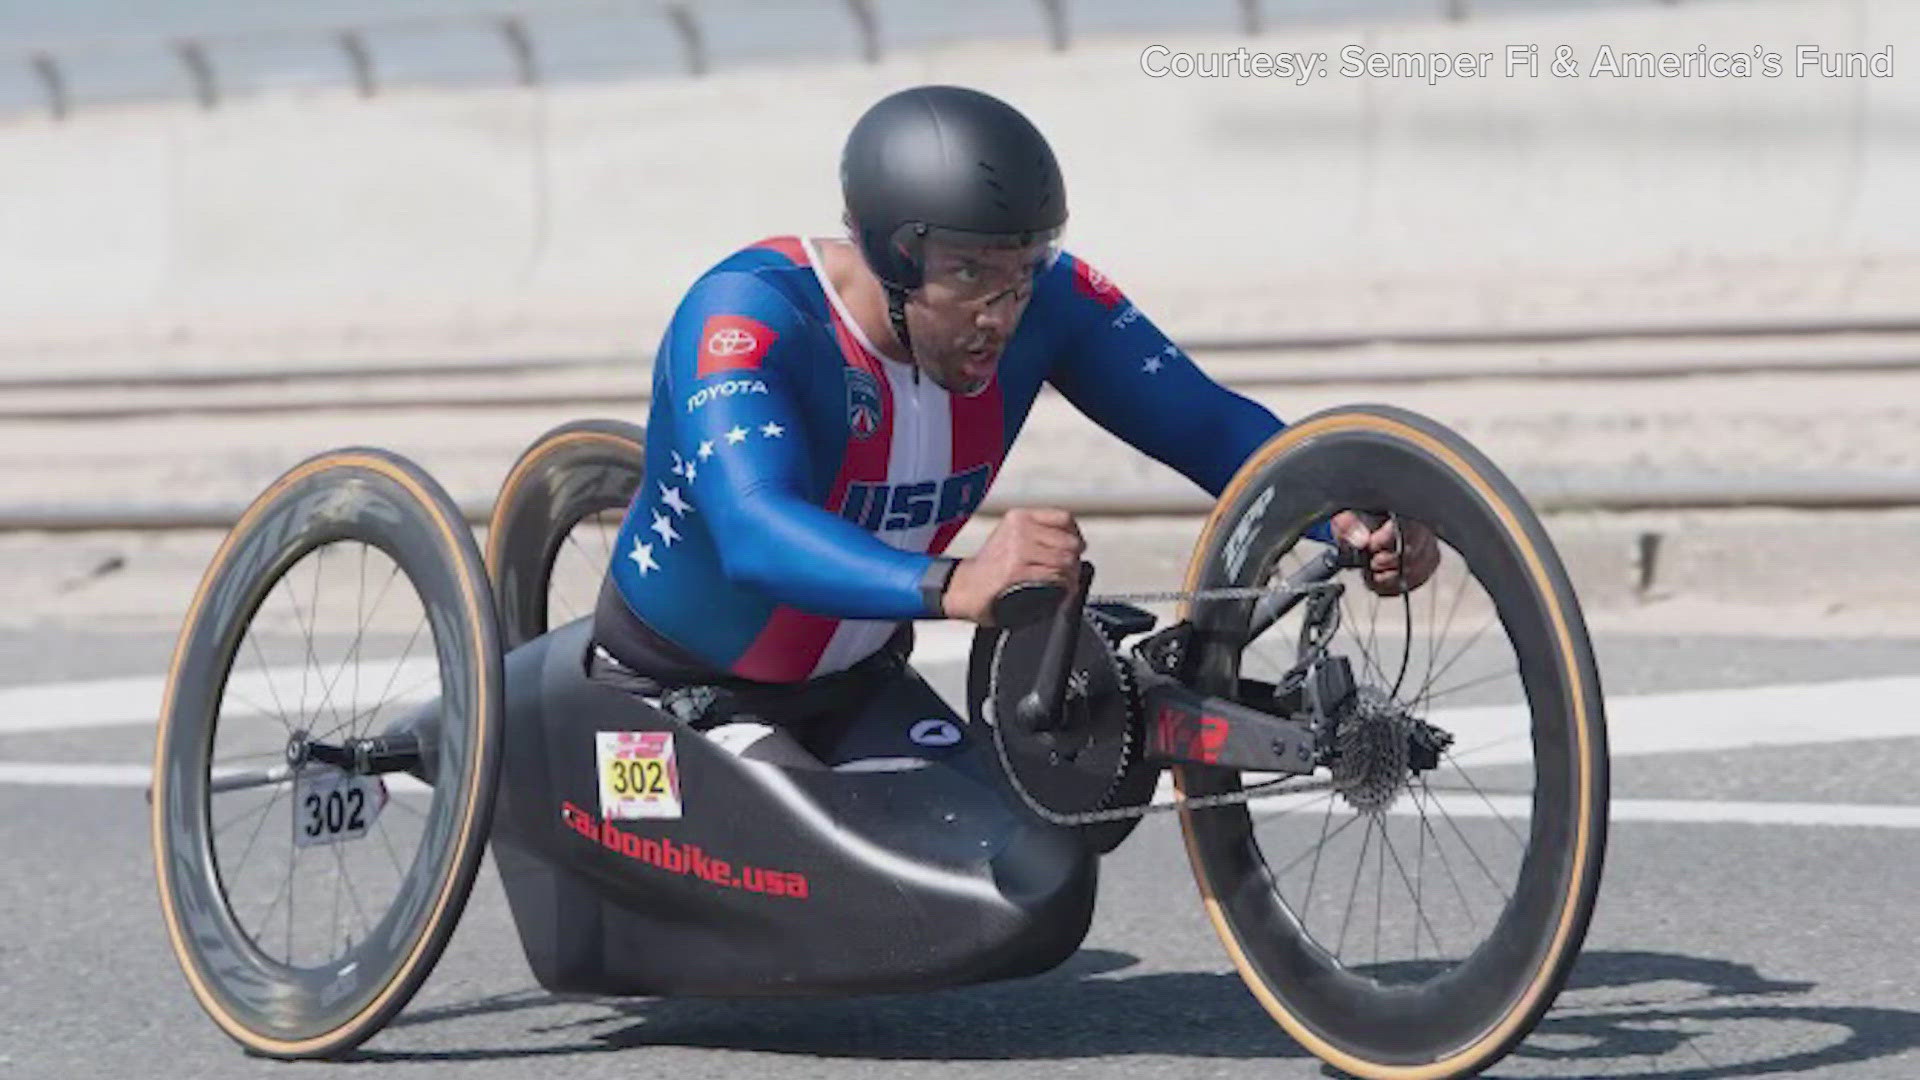 Ivan Perez, who served in the Marines, hasn't let his disabilities stop him from training for the Paralympics.